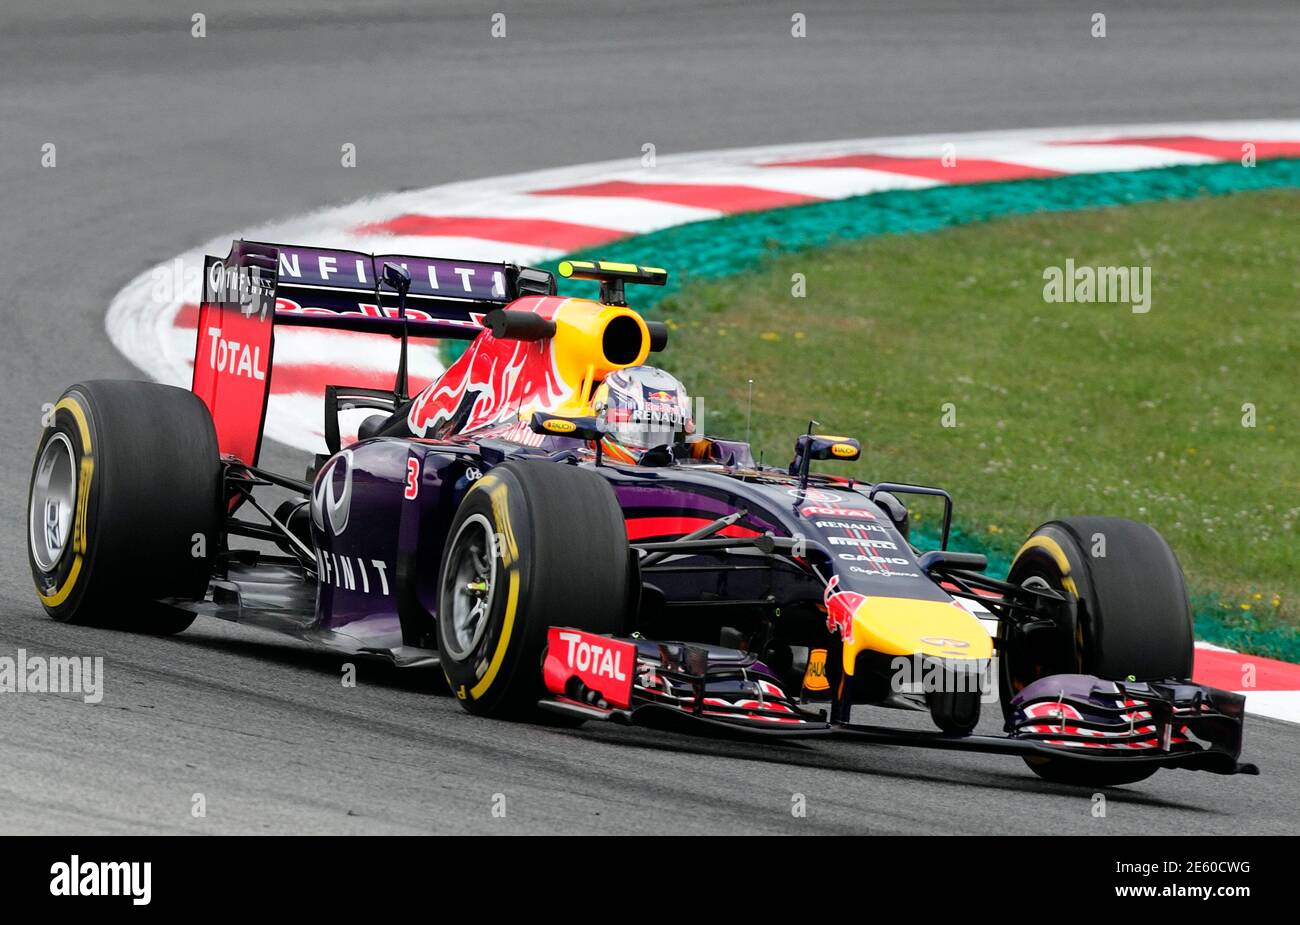 Red Bull Formula One driver Daniel Ricciardo of Australia drives during the  first practice session of the Austrian F1 Grand Prix at the Red Bull Ring  circuit in Spielberg June 20, 2014.